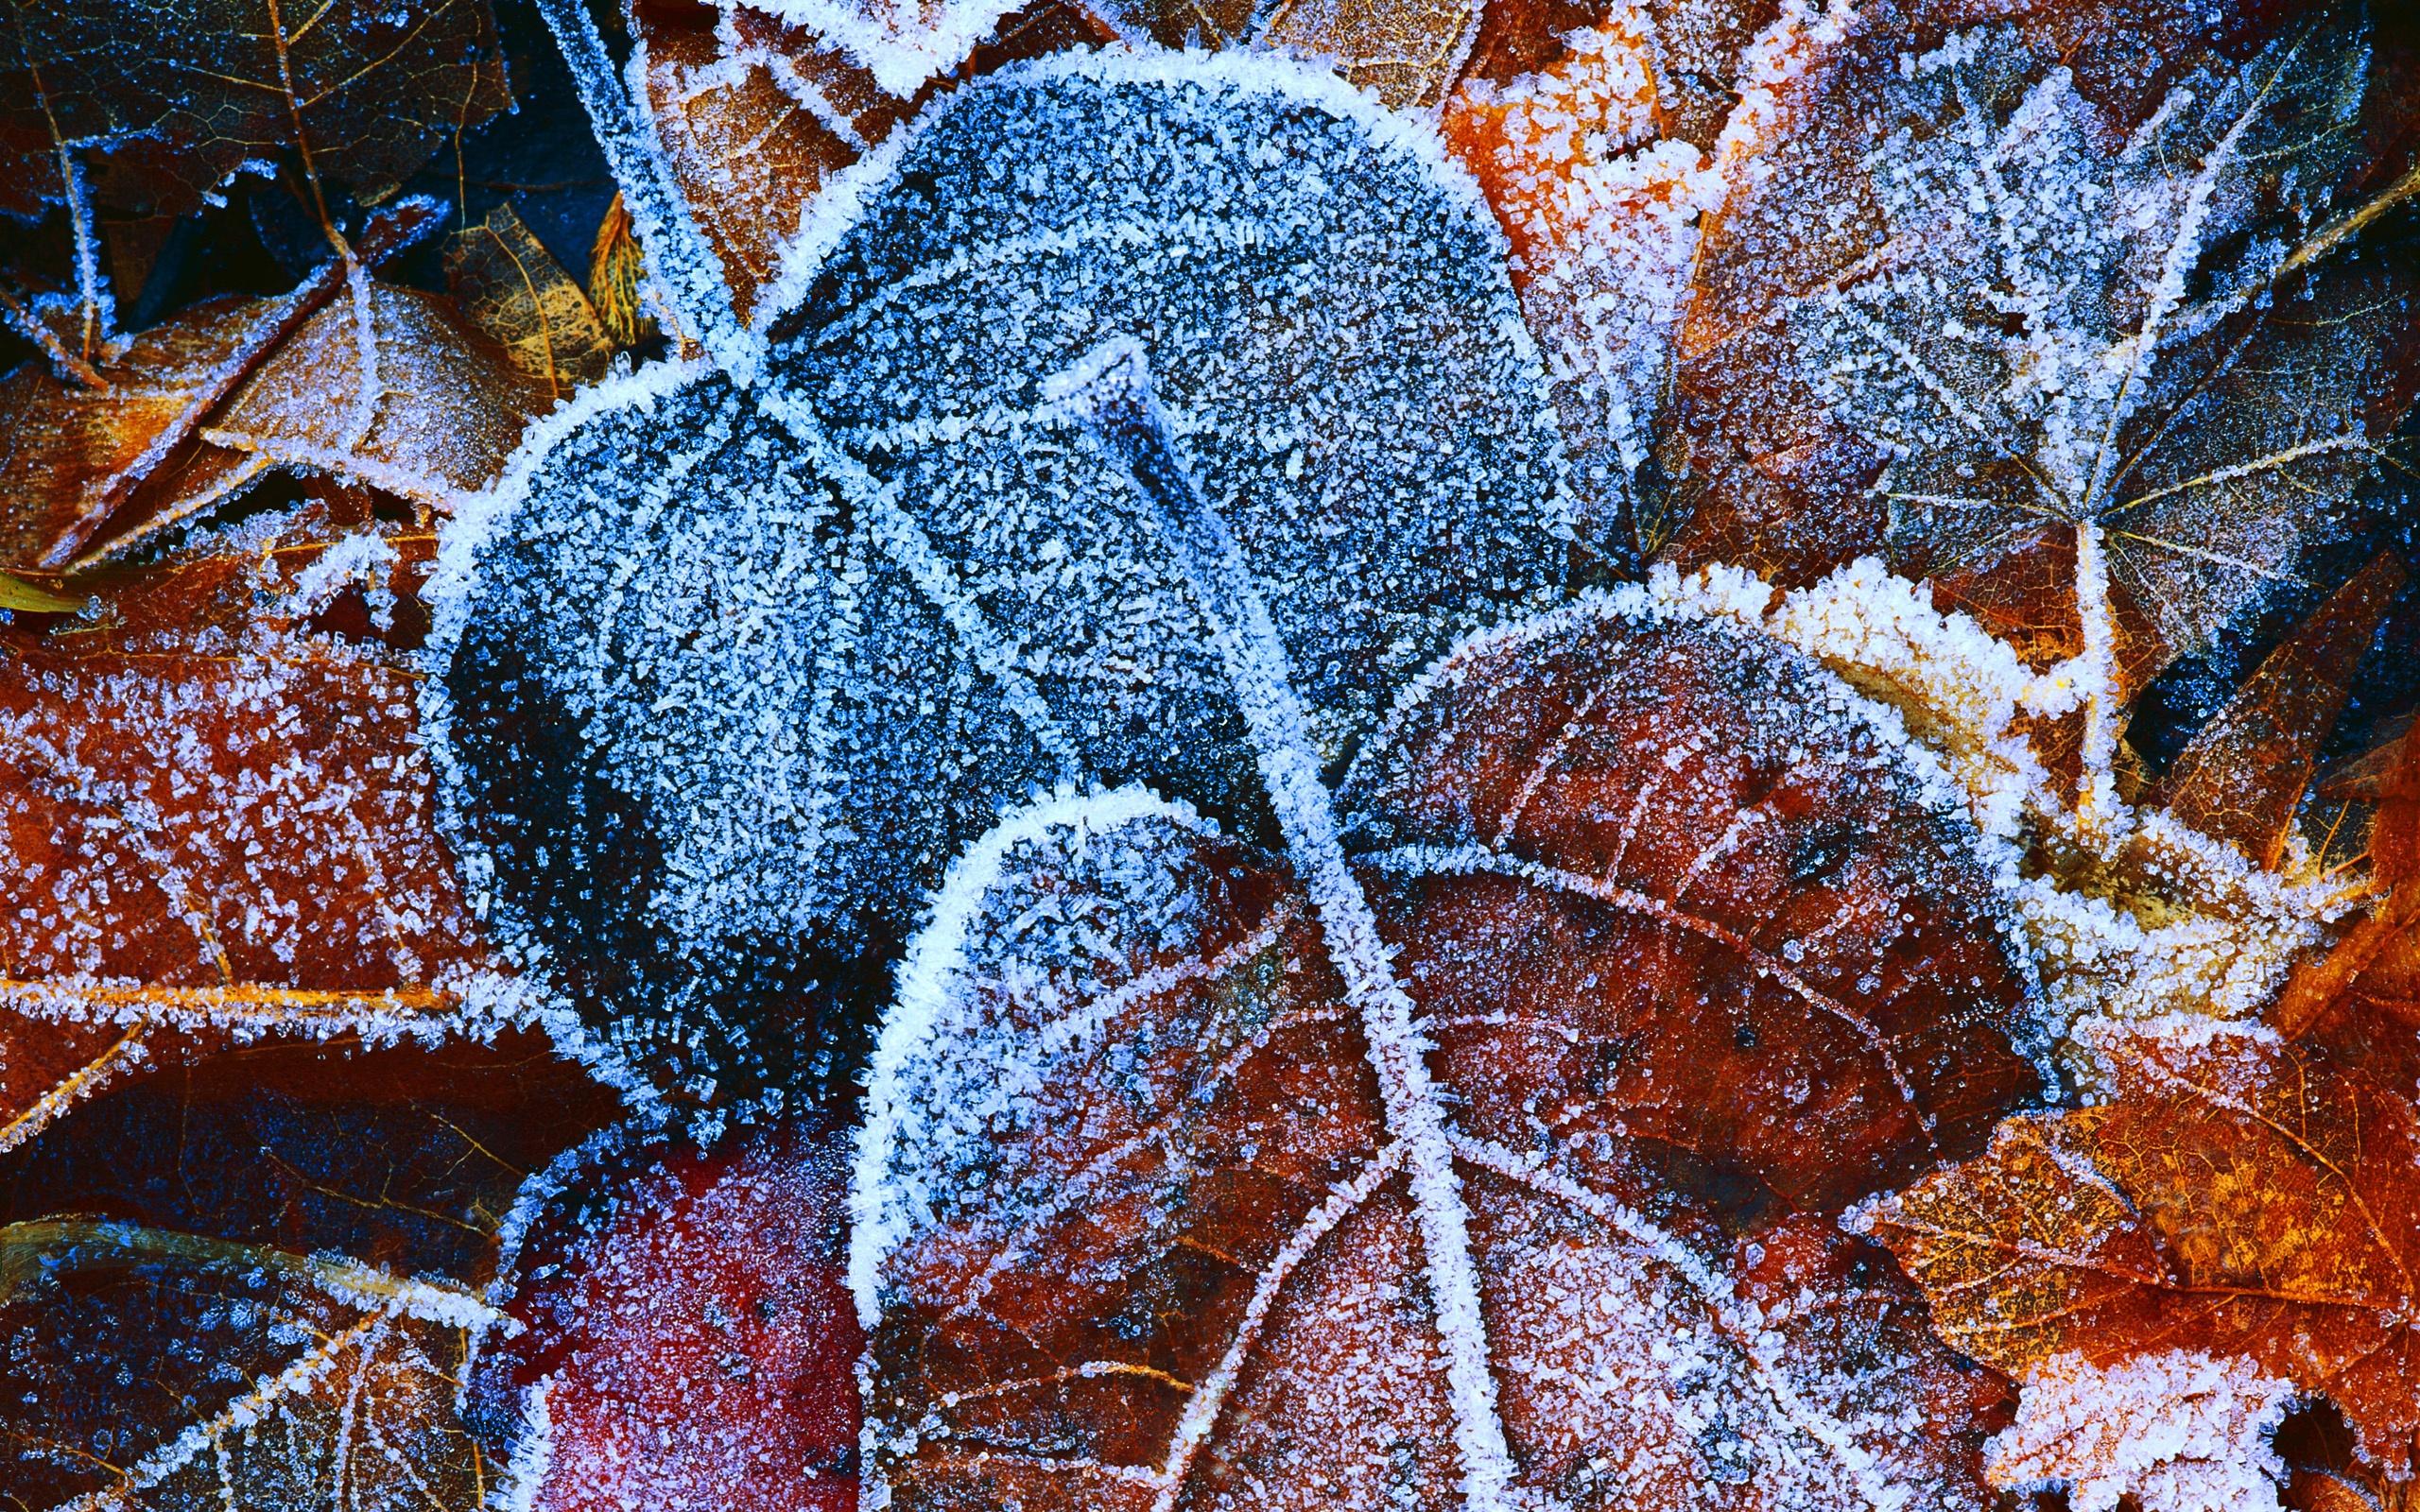 Frosty Autumn Leaves Wallpaper in jpg format for free download